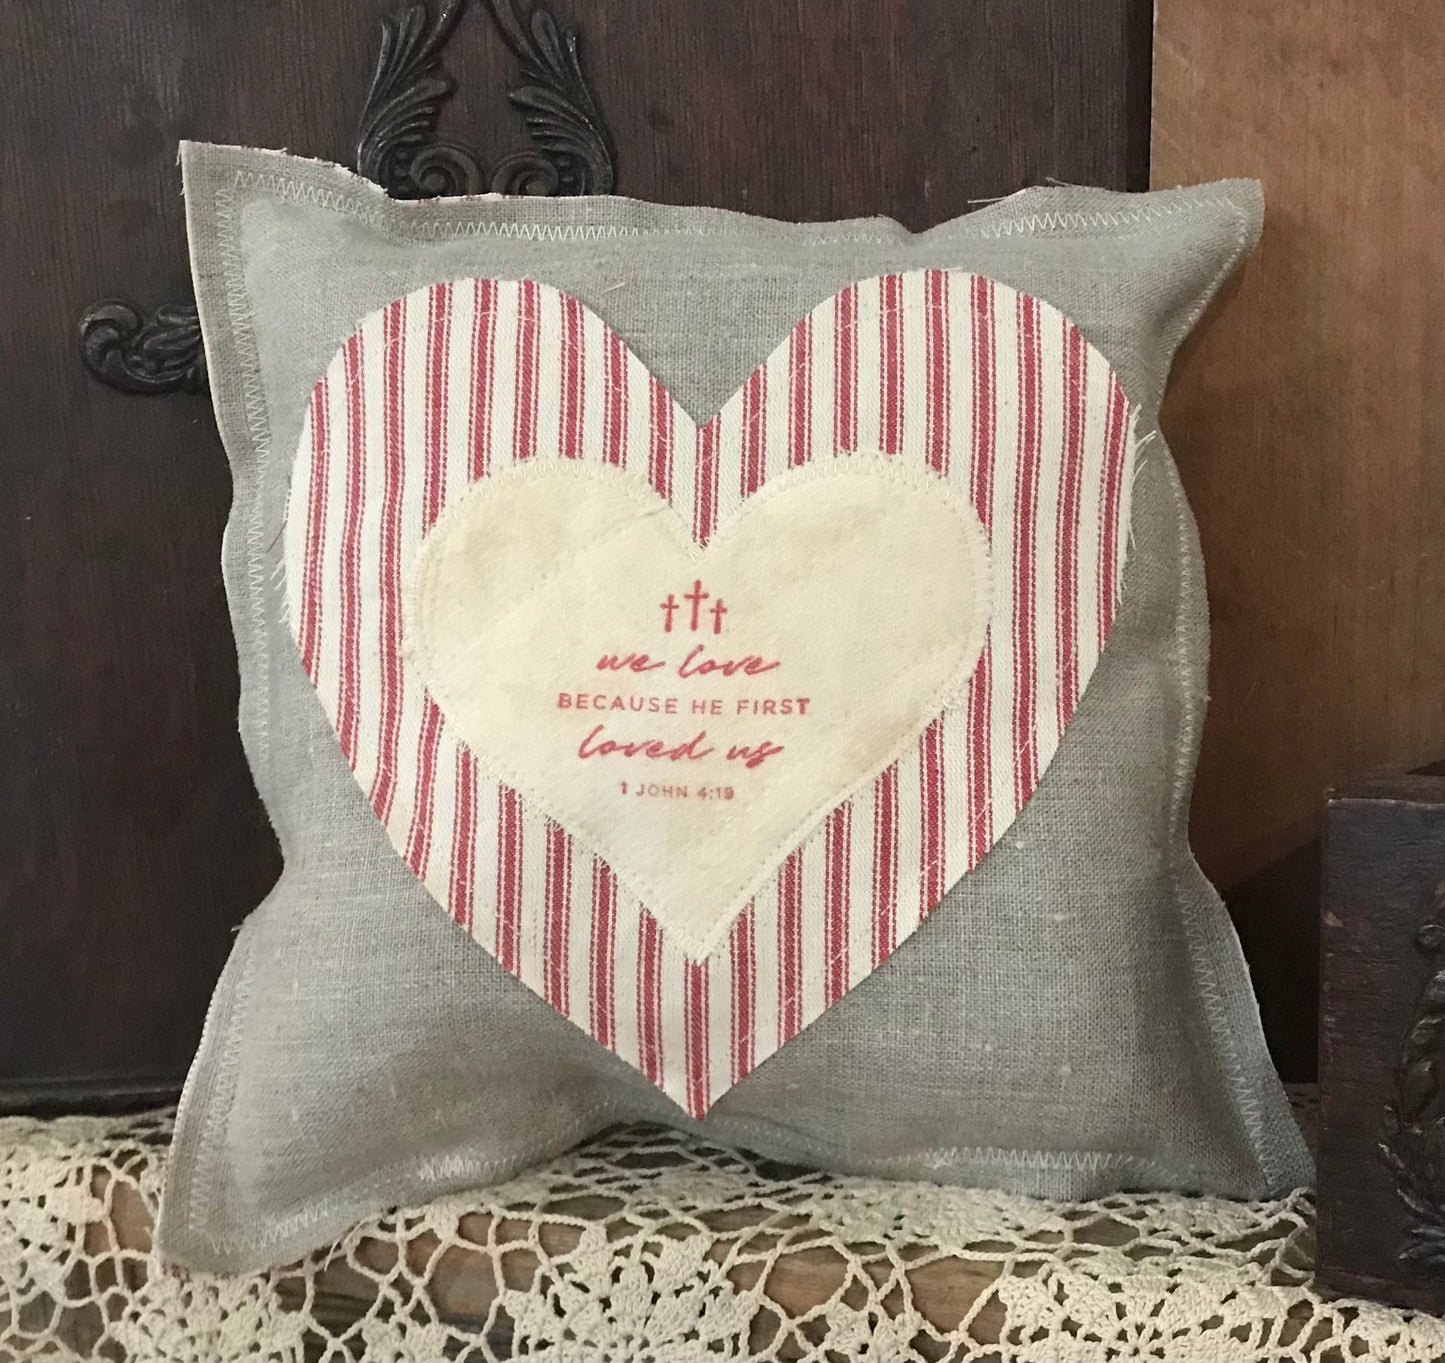 Love Pillows * We love because...